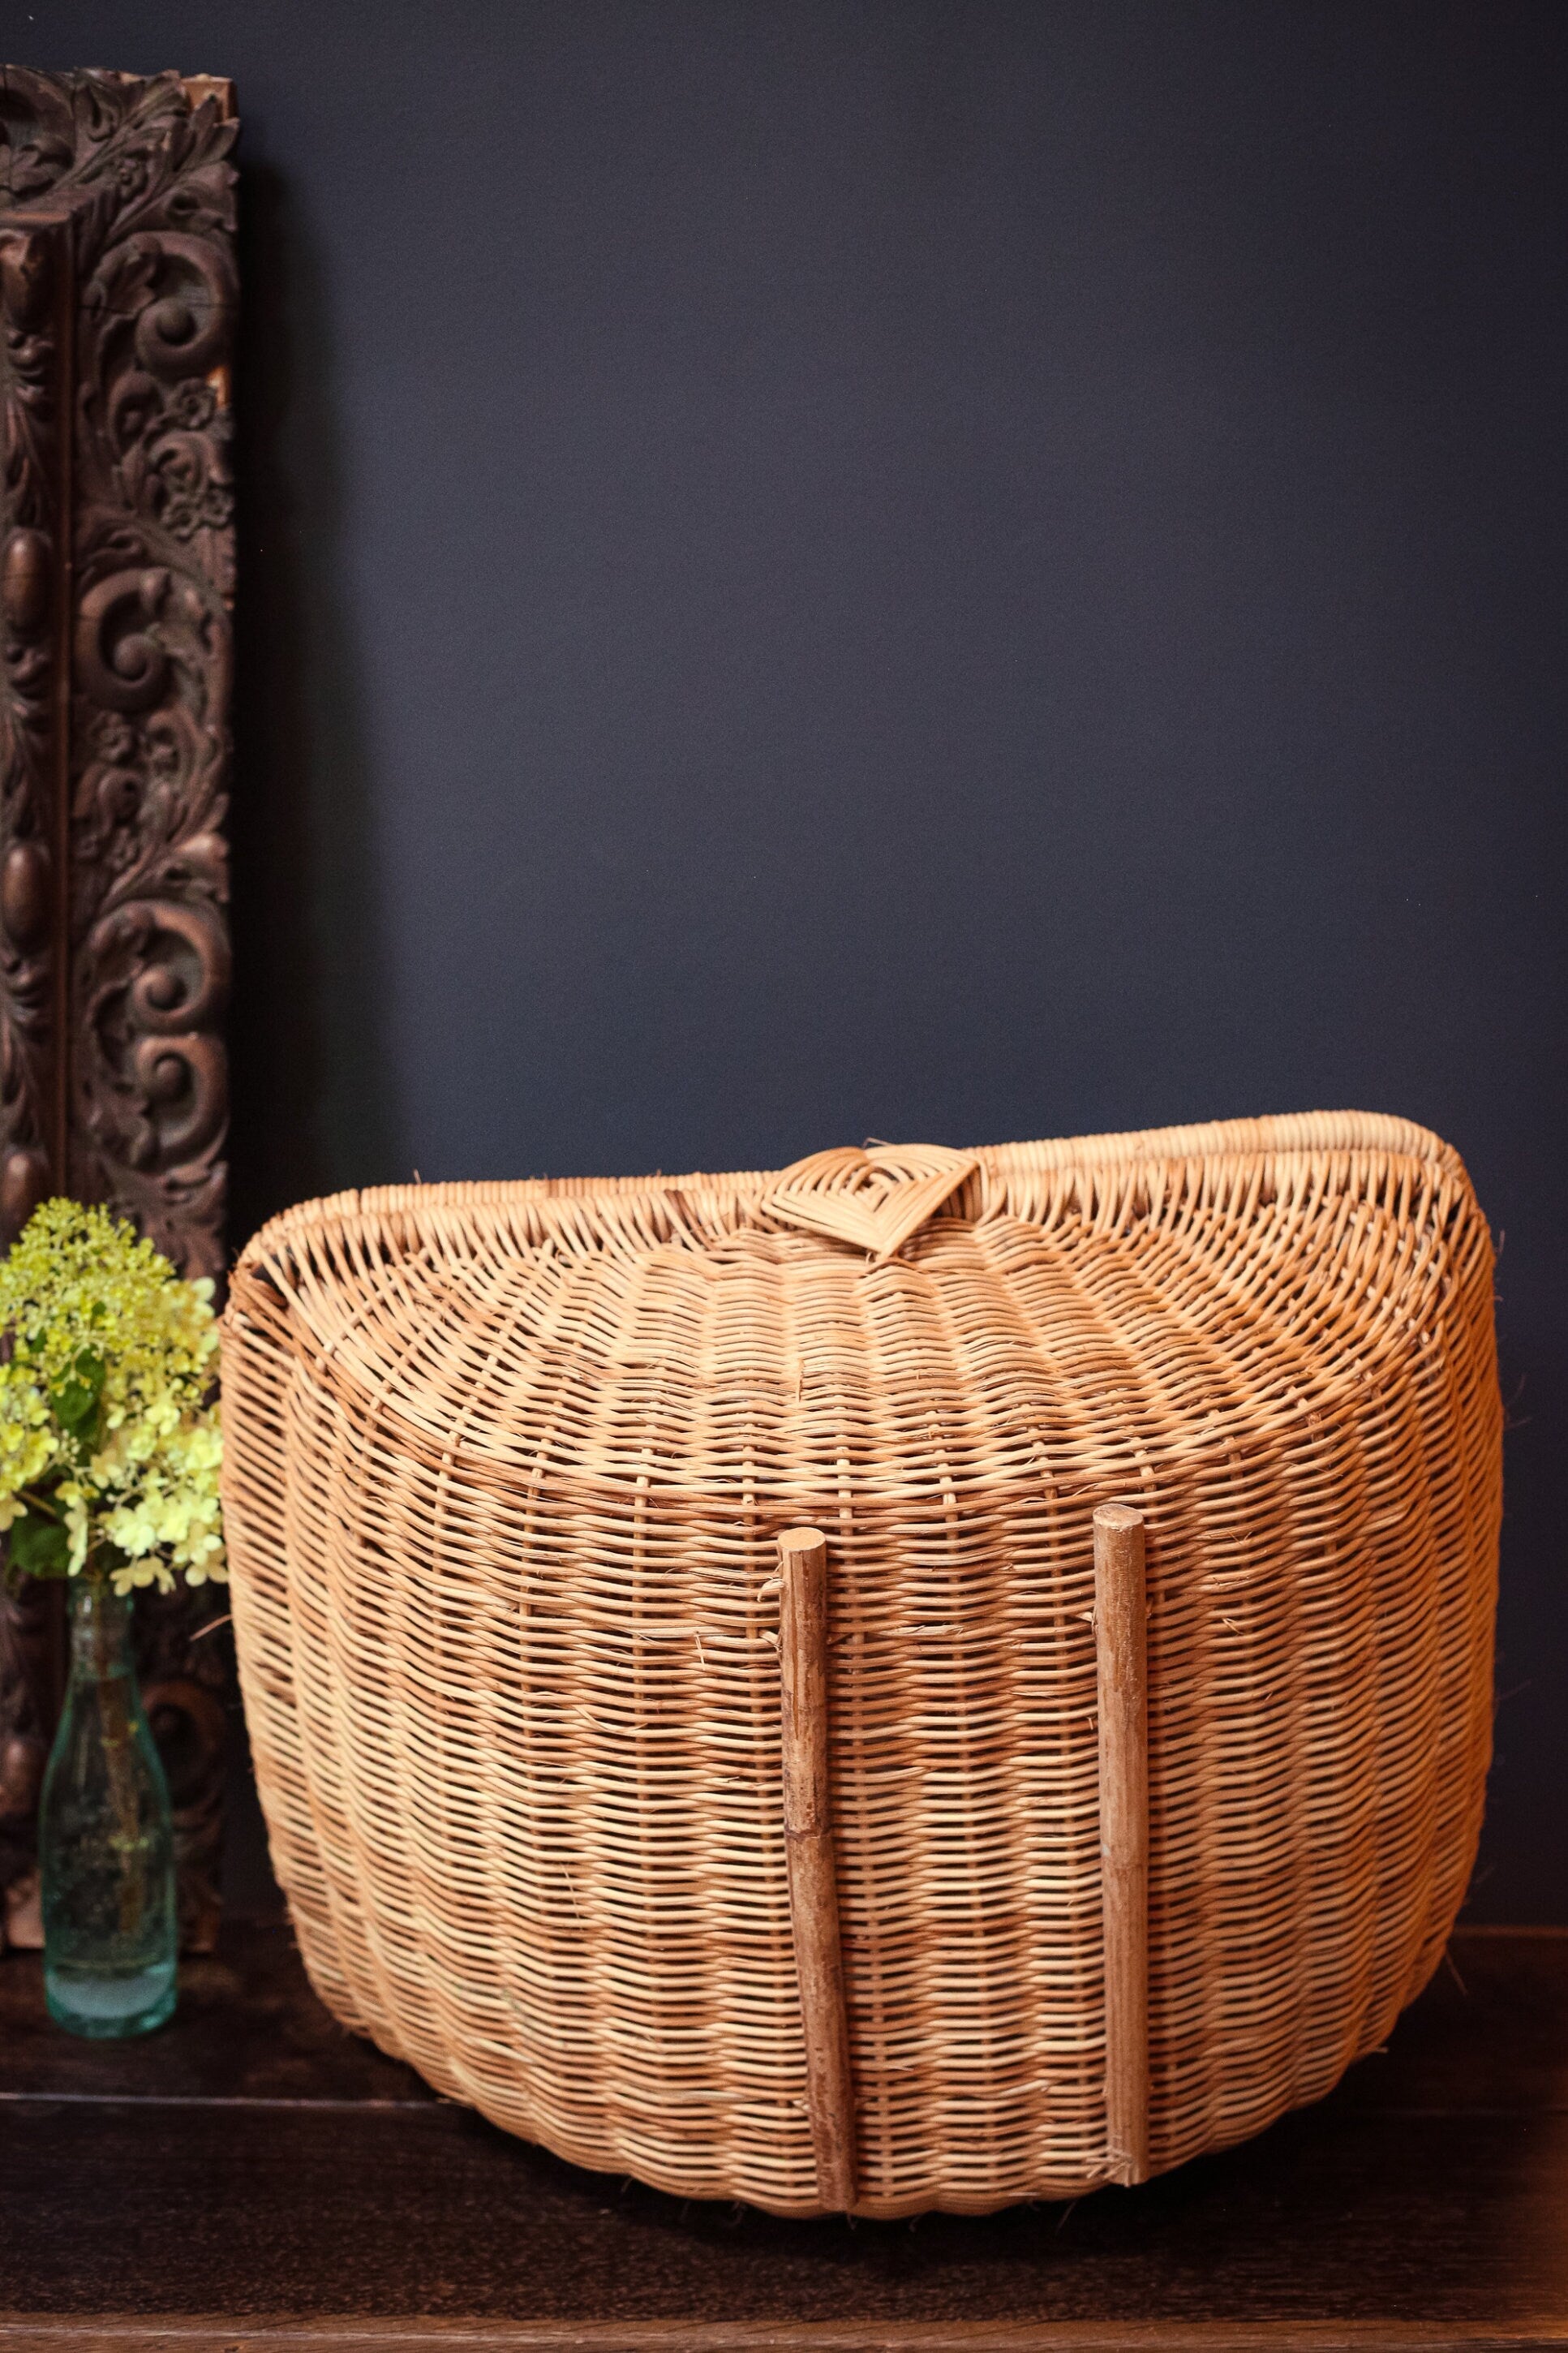 Oversized Round Bottom Wicker Rattan Picnic Basket with Handle - Extra Large/ Giant Modern Farmhouse Country Basket